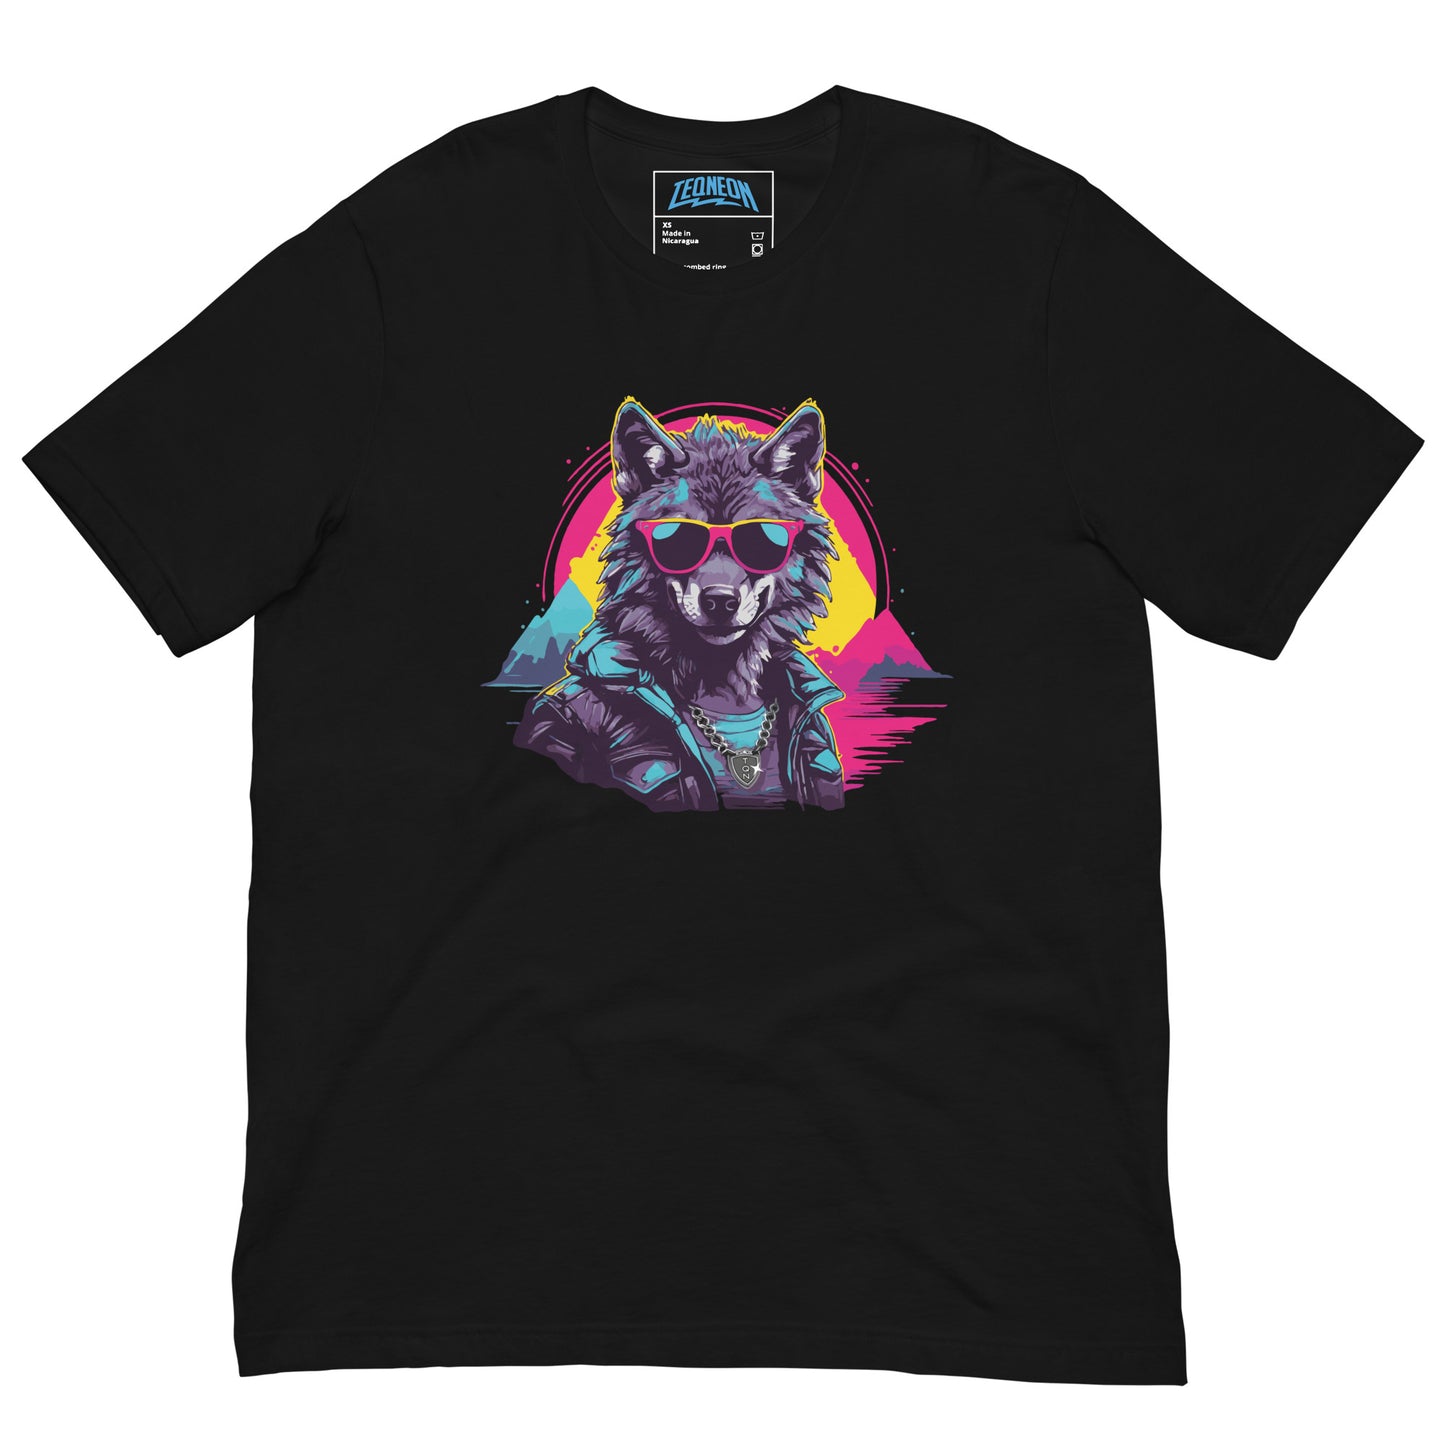 Black T-shirt featuring a funny, pimp-styled wolf wearing sunglasses and a shiny silver chain from the HA HA LAND collection. The HOWLIN' HIPSTER design showcases a hipster wolf with cool accessories, perfect for a unique and humorous fashion statement.